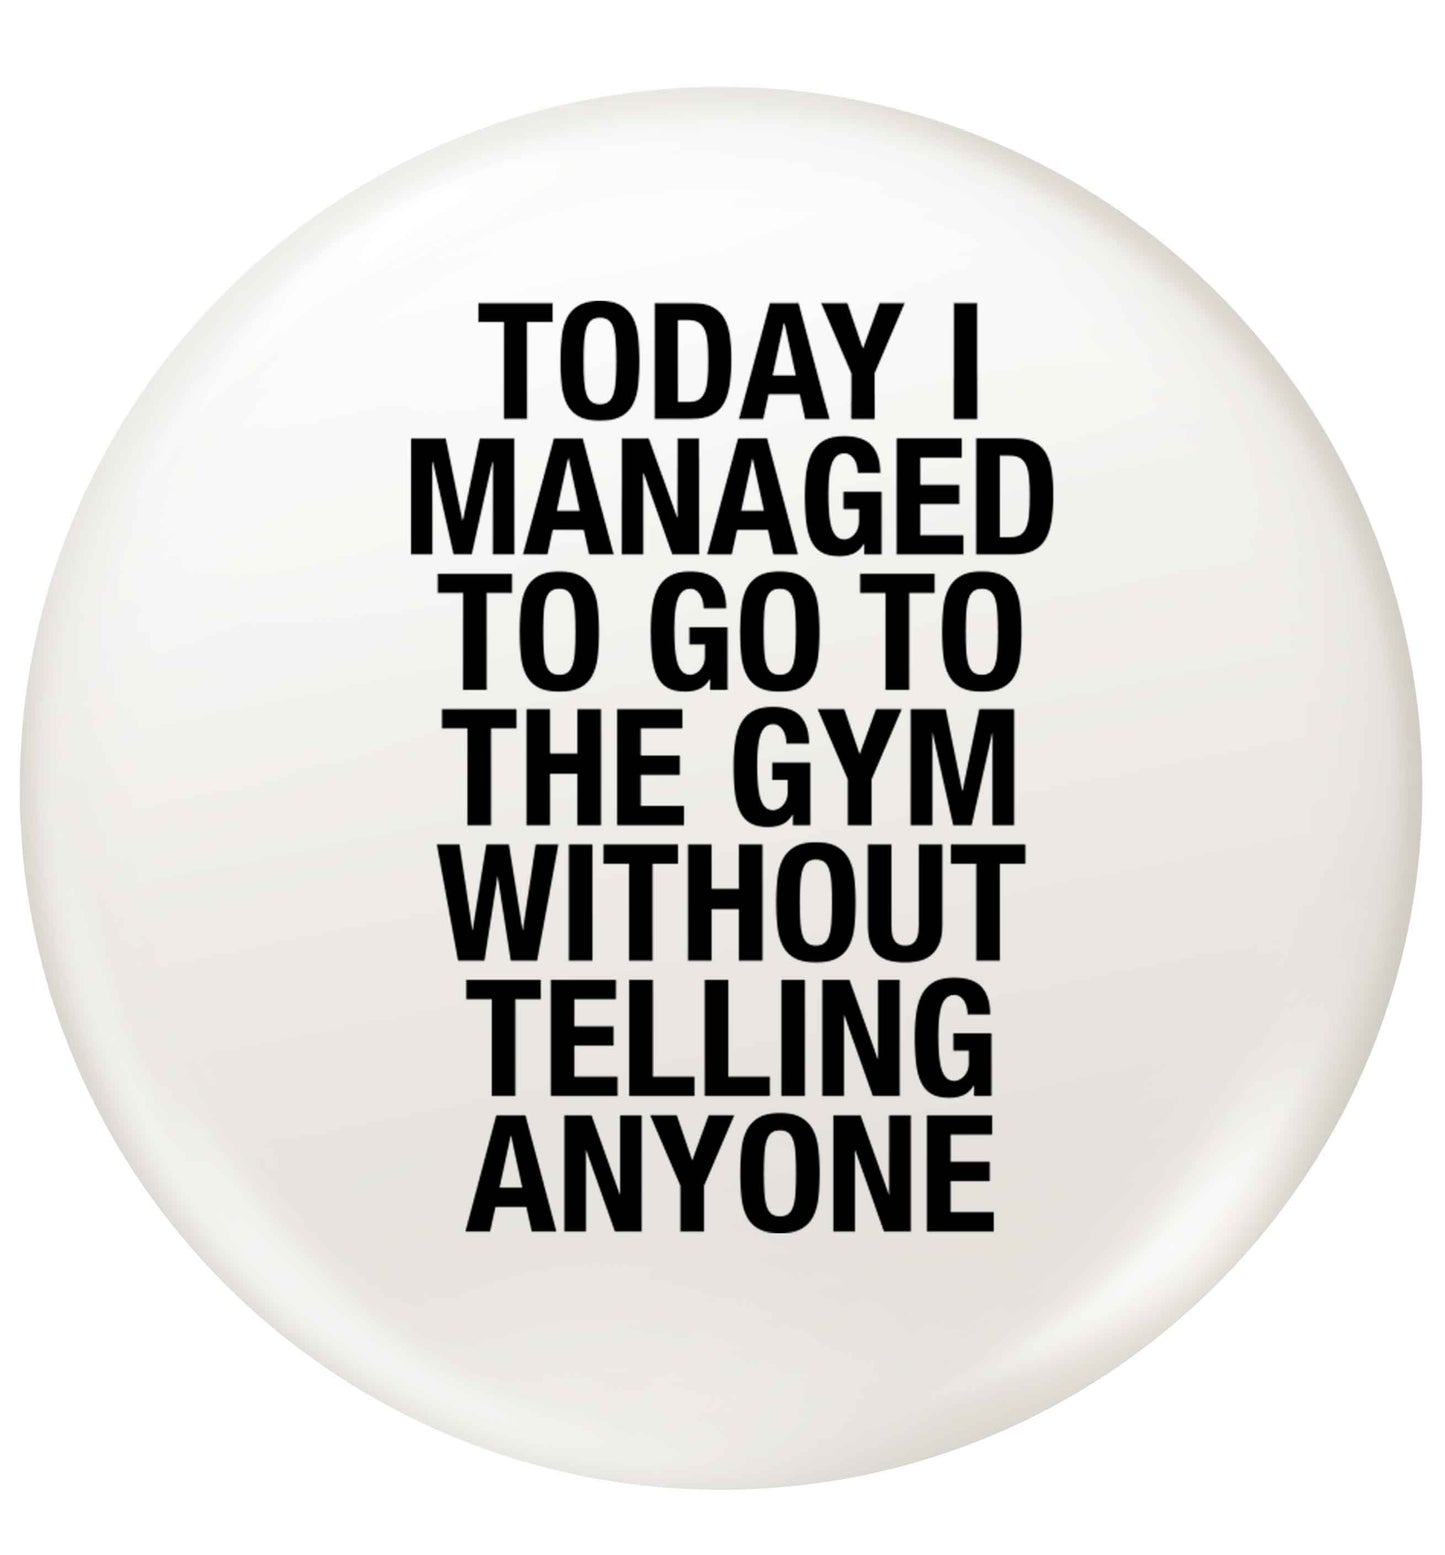 Today I managed to go to the gym without telling anyone small 25mm Pin badge